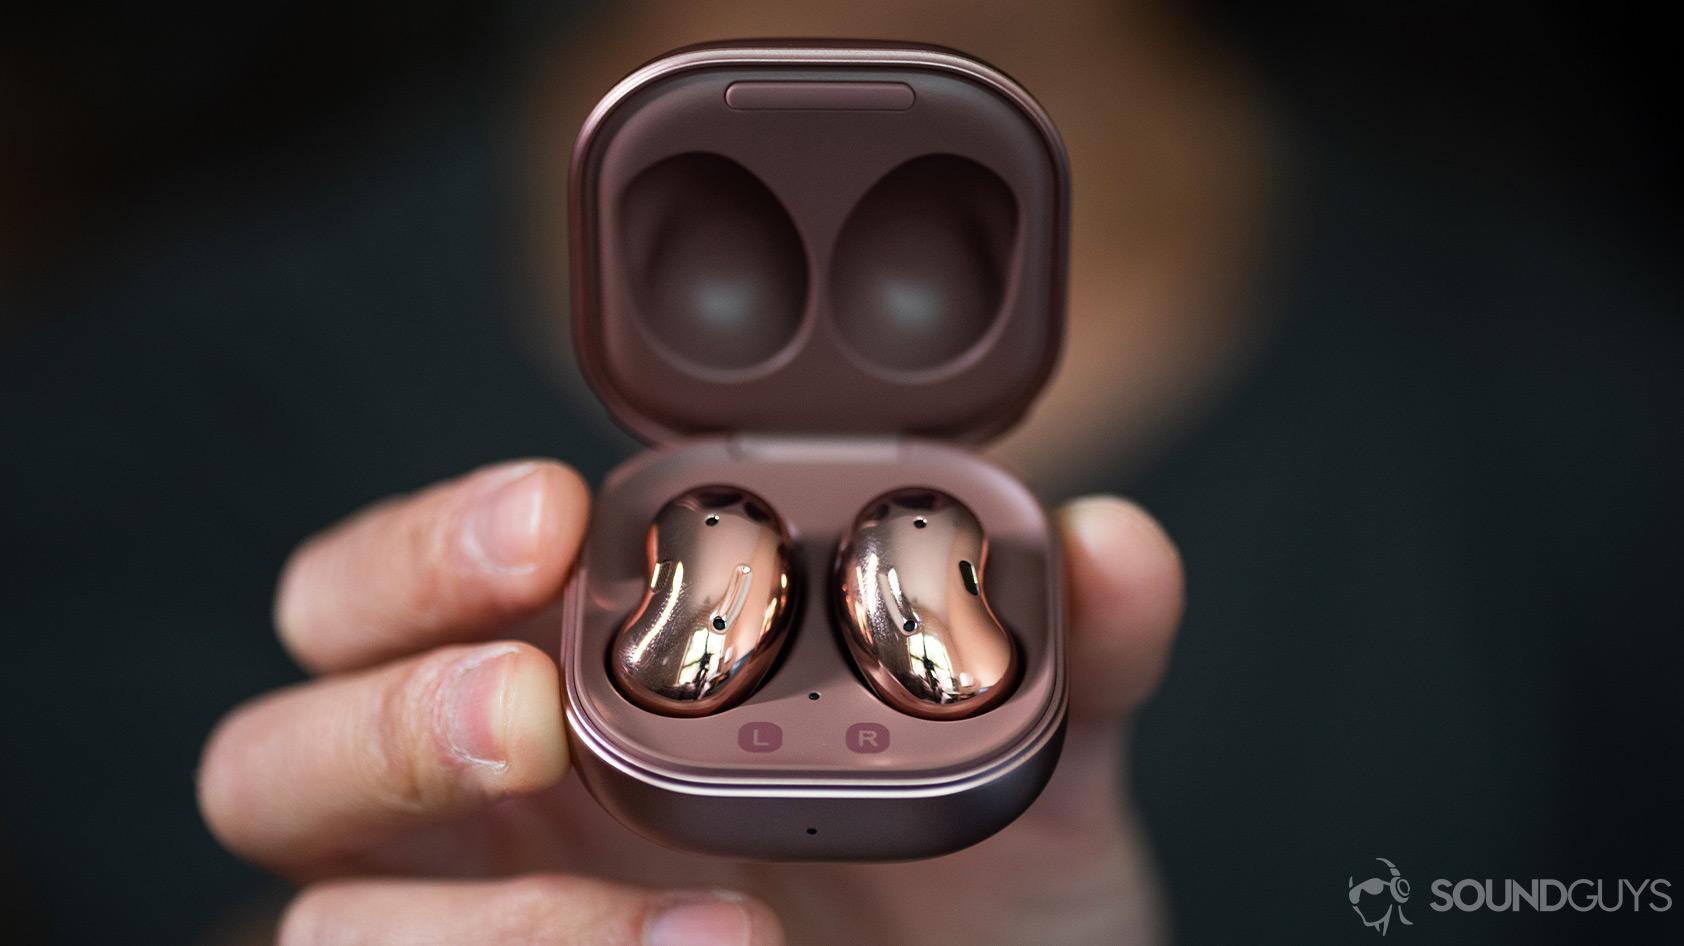 A picture of the Samsung Galaxy Buds Live noise canceling true wireless earbuds in the case being held in a hand.